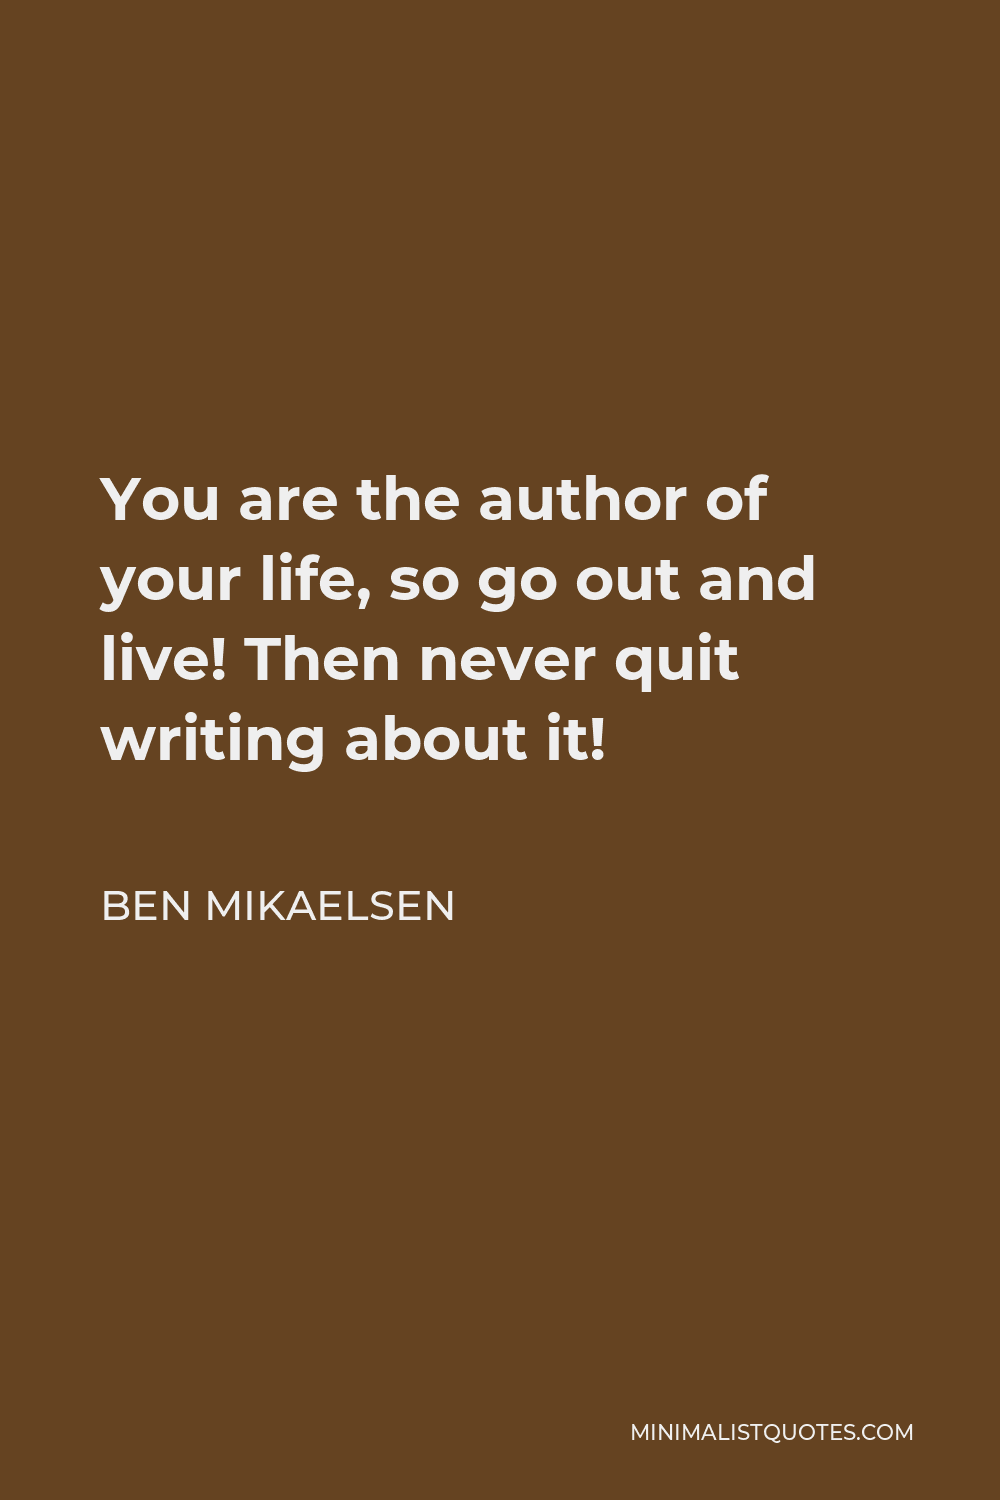 Ben Mikaelsen Quote - You are the author of your life, so go out and live! Then never quit writing about it!